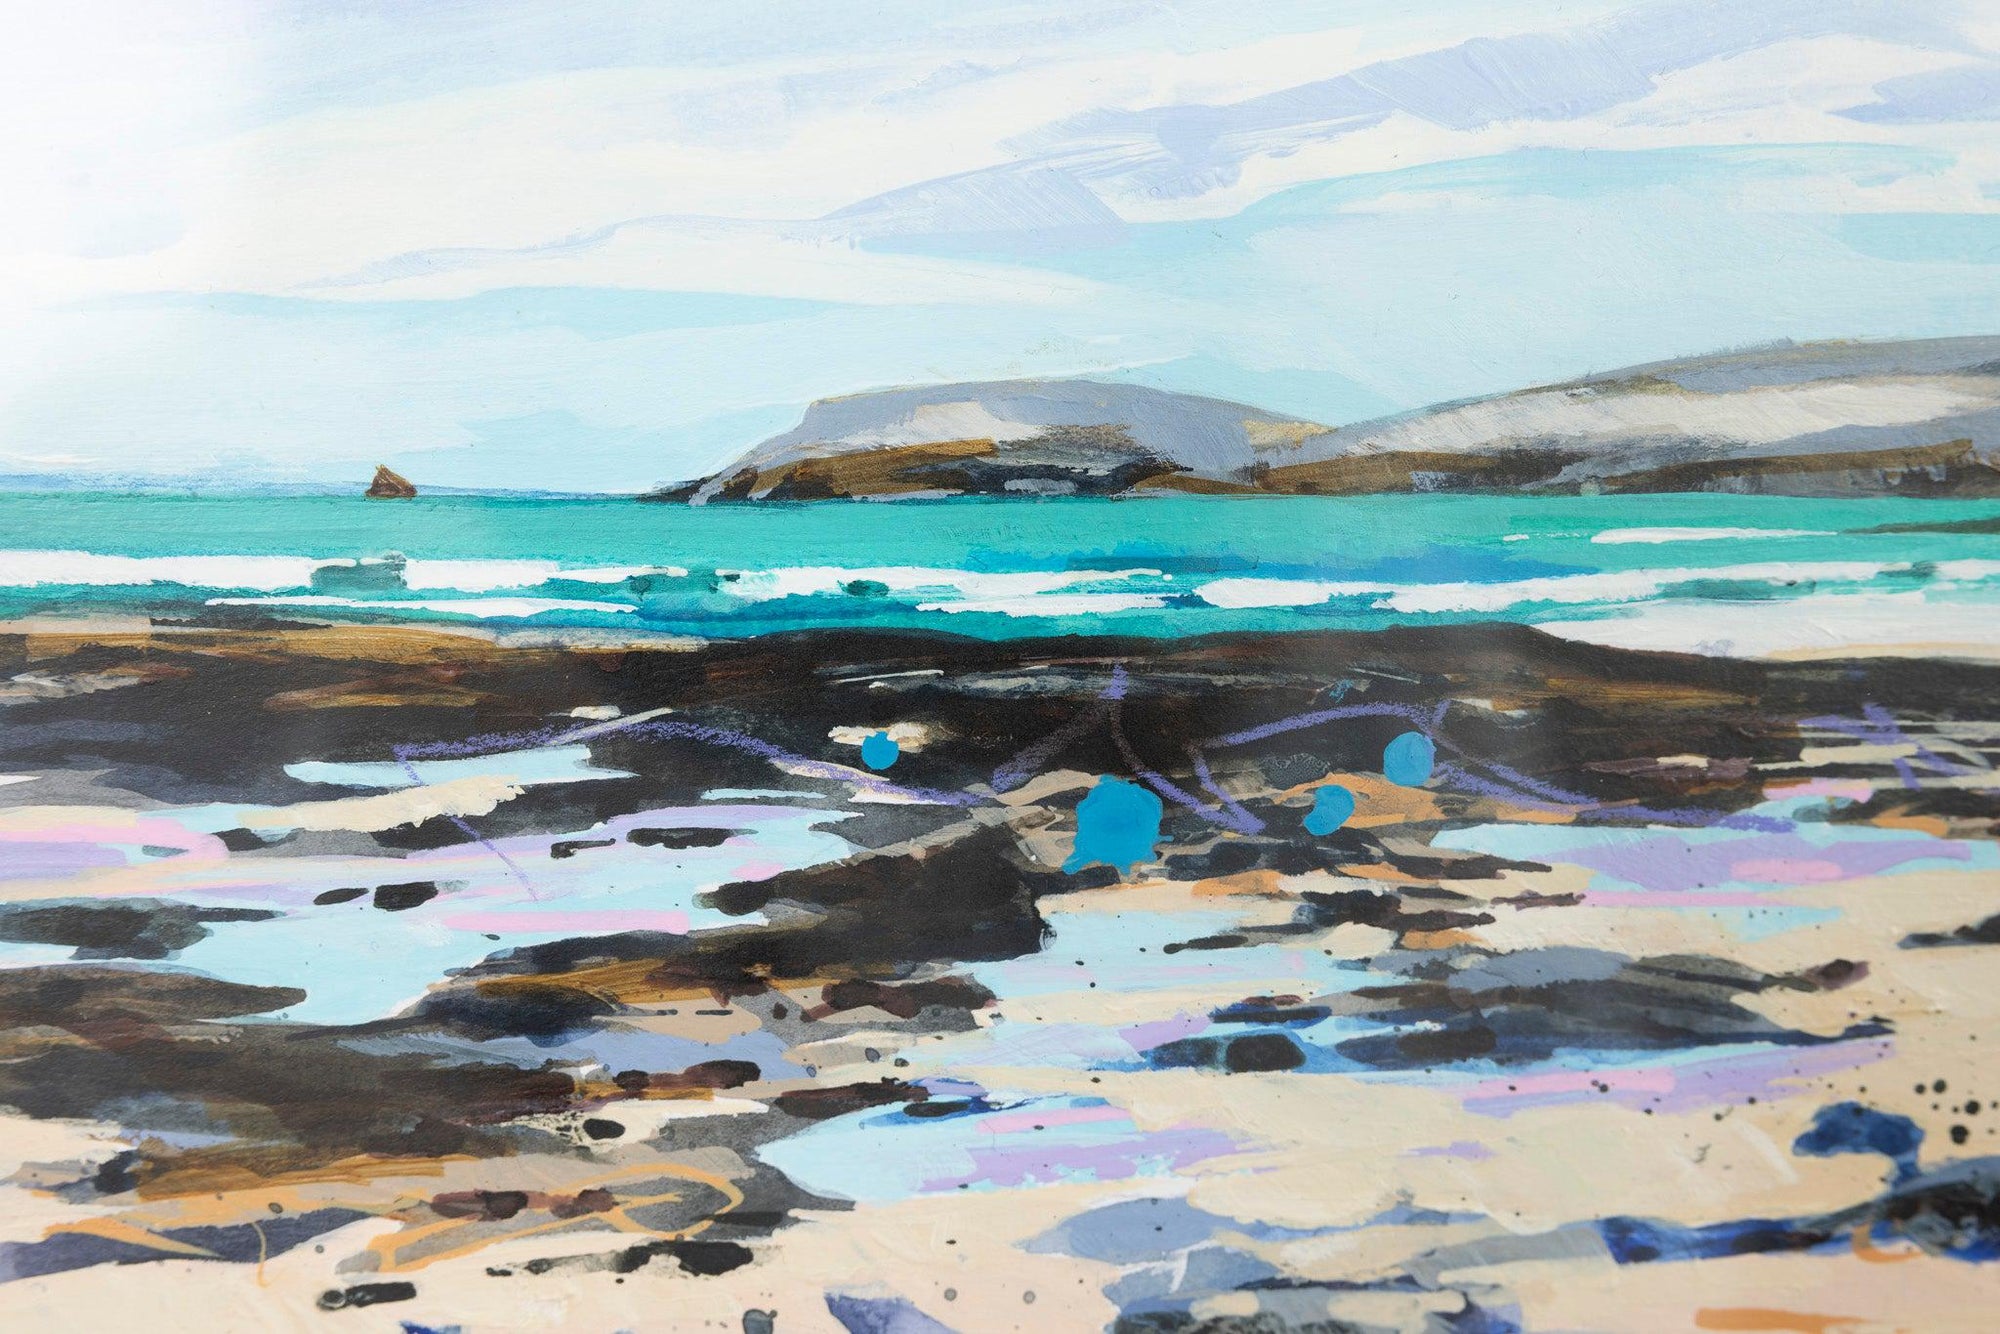 Low tide at Constantine Bay, Lucy Davies, Available from Padstow Gallery